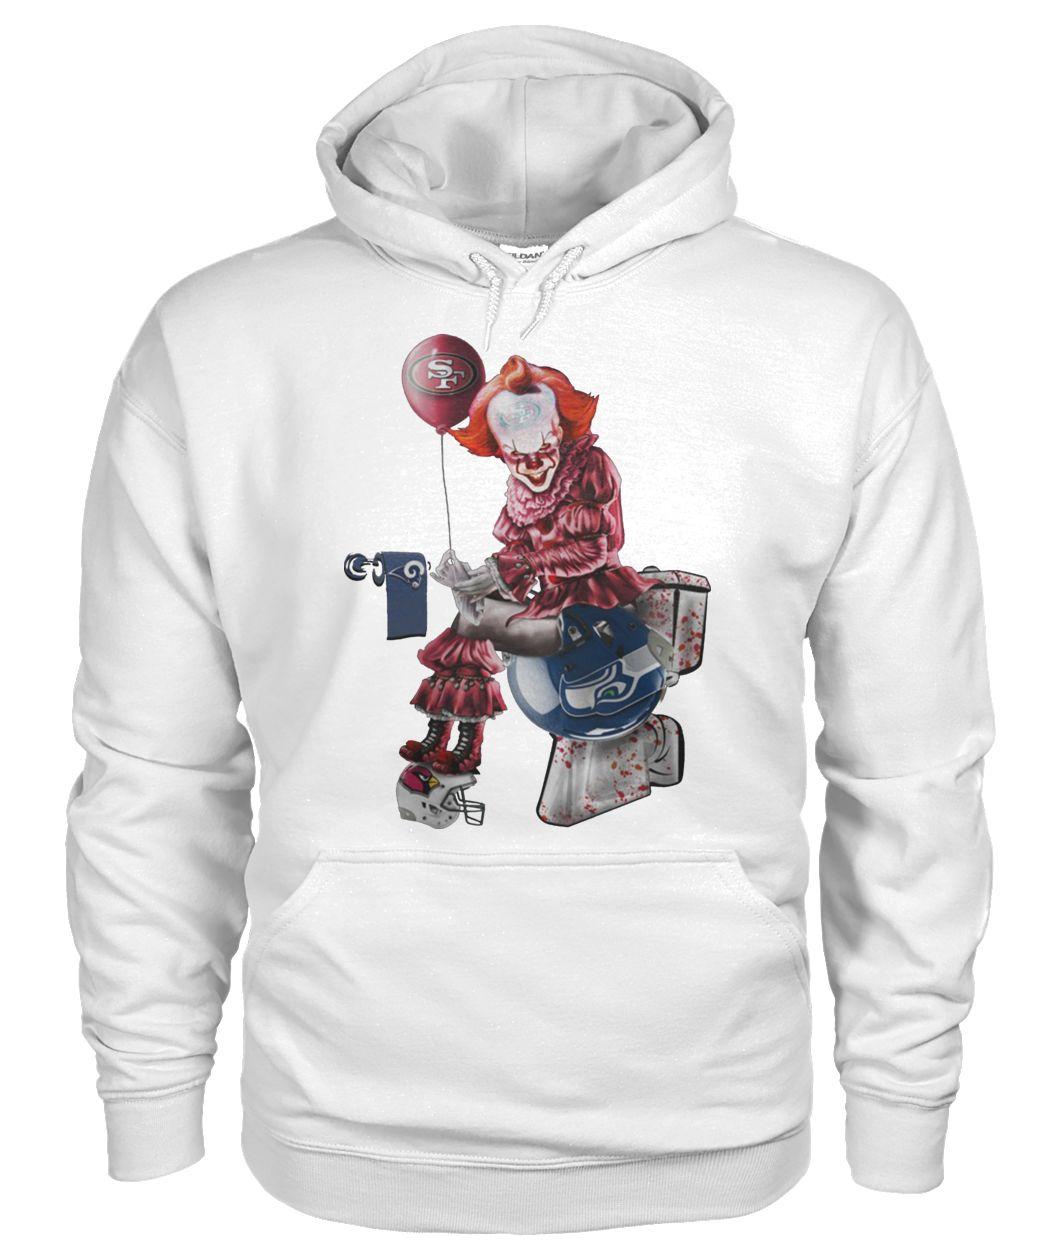 It pennywise san francisco 49ers sitting on seattle seahawks hoodie